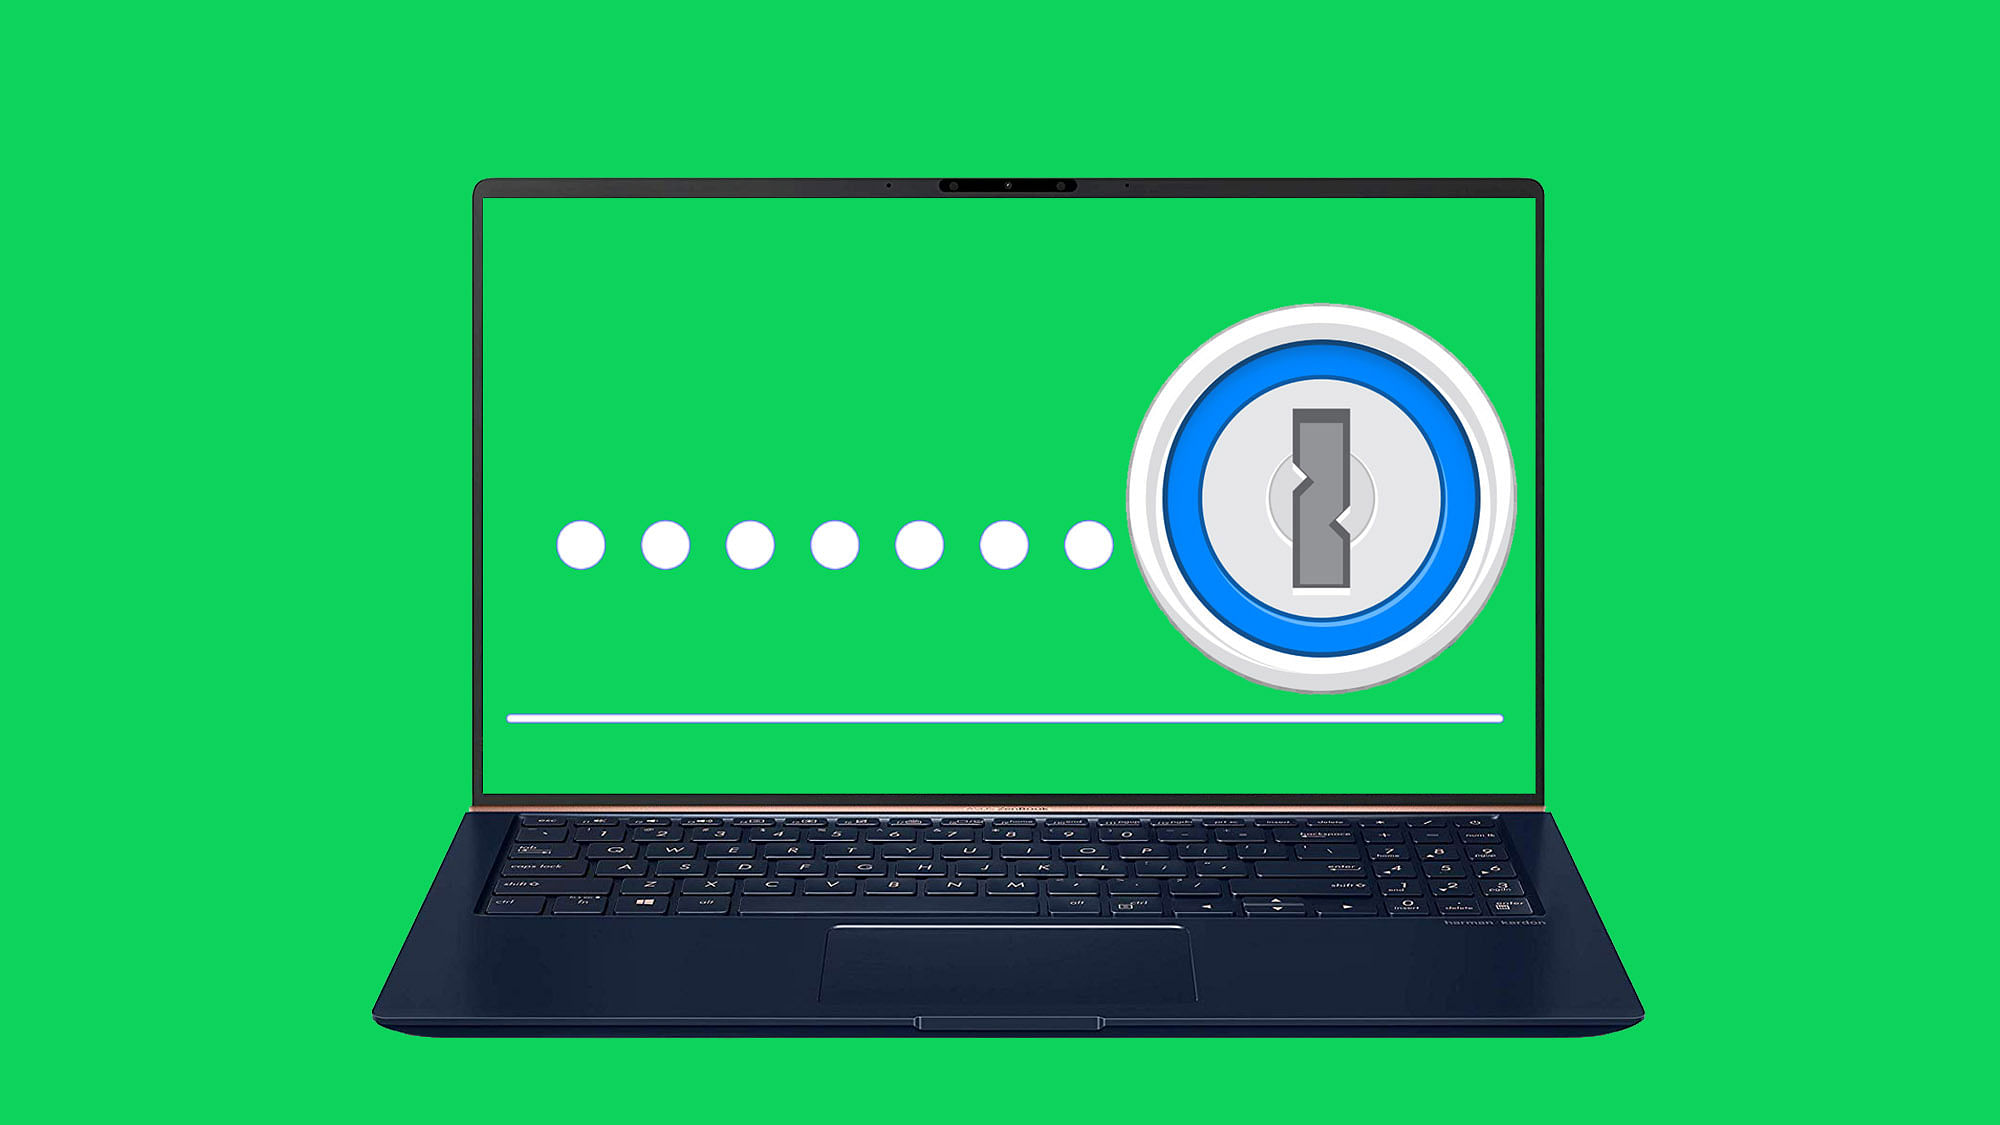 <div class="paragraphs"><p>Android, iOS, and Windows OS users can expect to see seamless passwordless authentication across devices in the near future.</p></div>